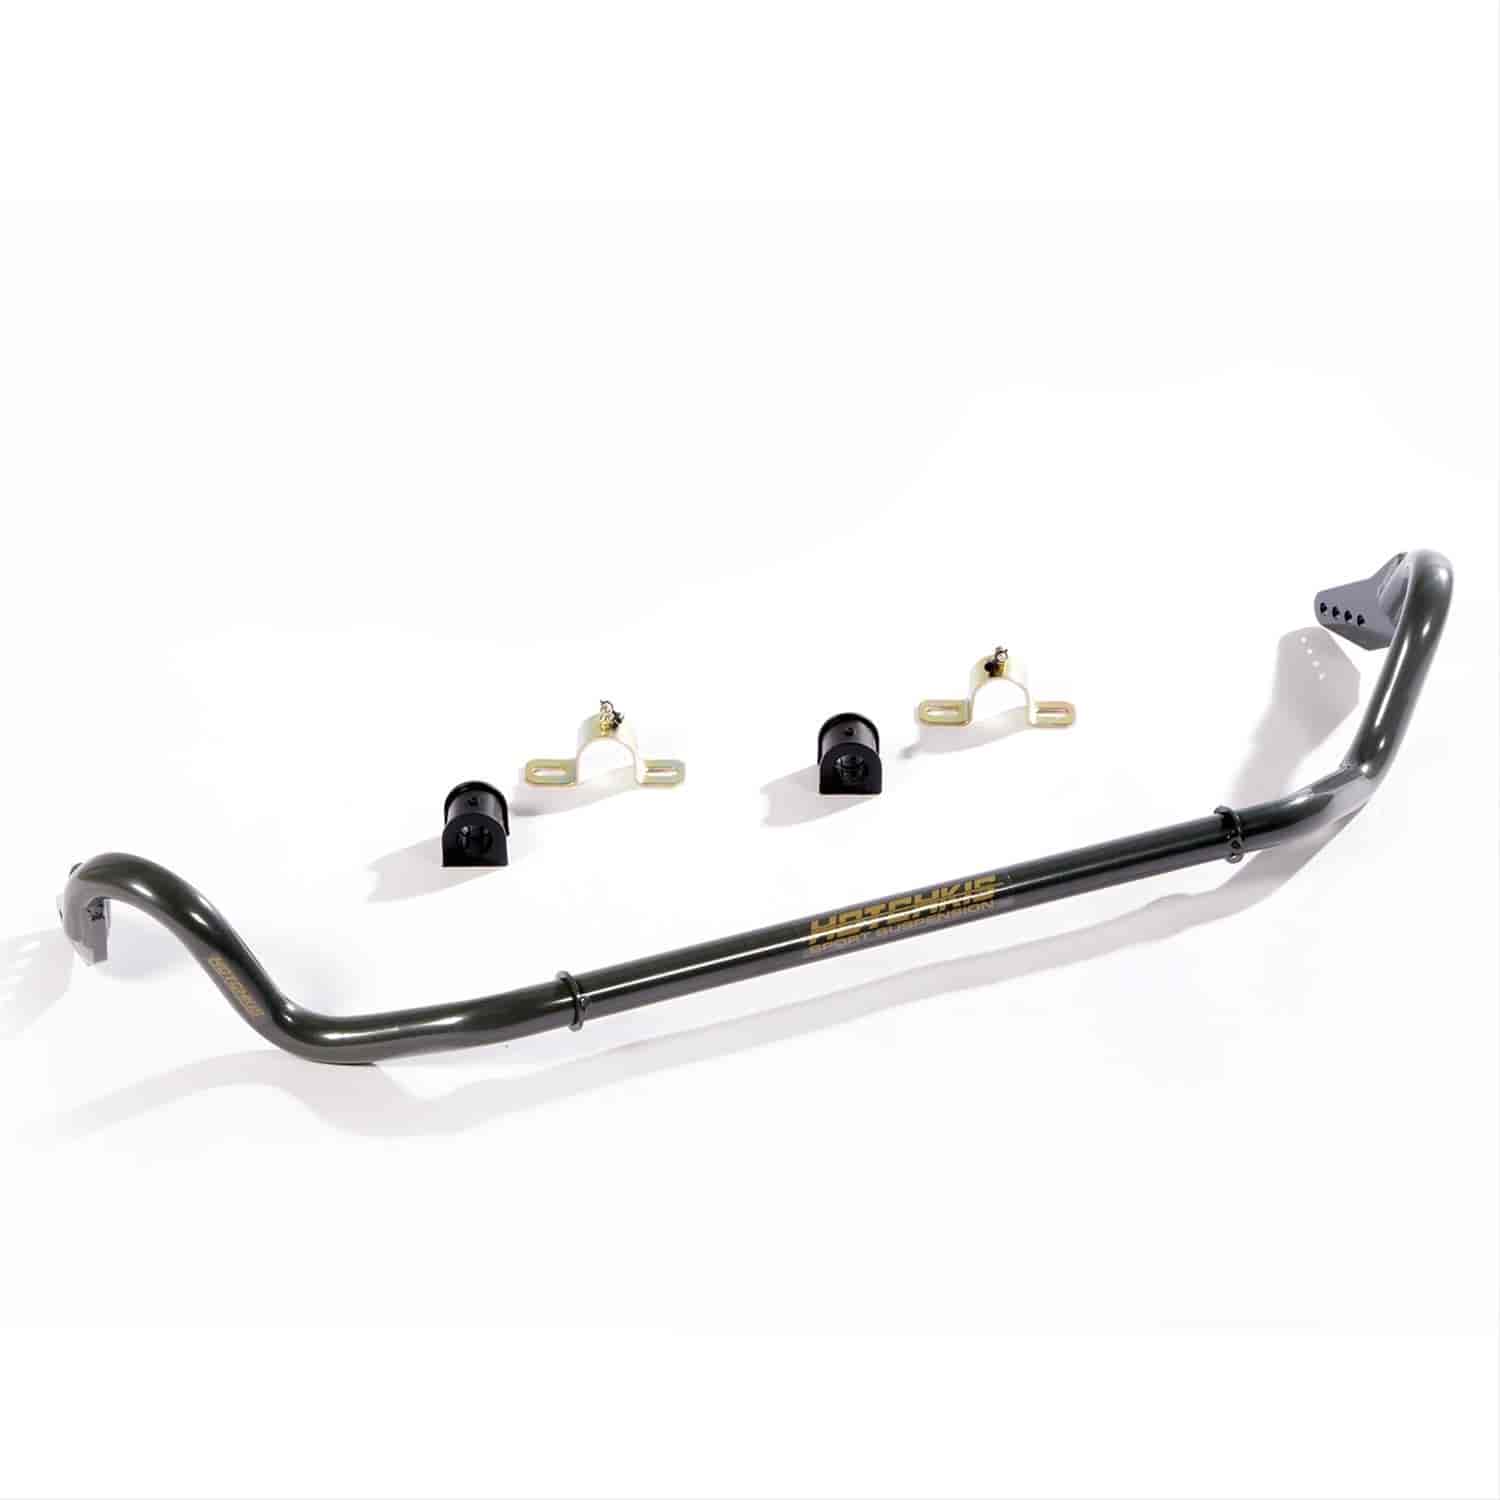 FRONT SWAY BAR BMW E9X M3